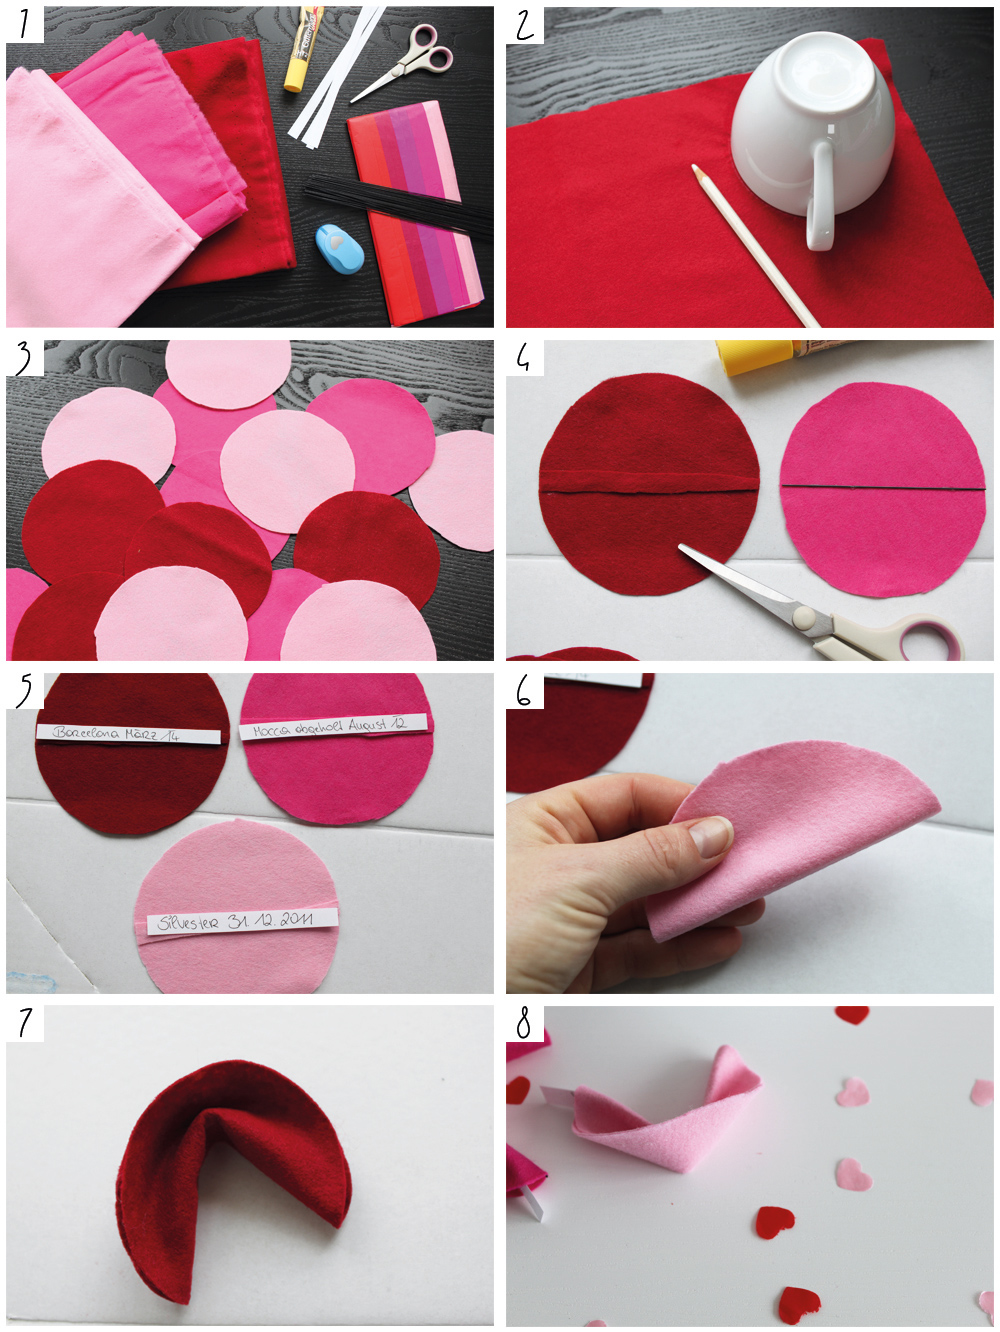 who is mocca, fashionblog, beautyblog, blogger tirol, austria, oesterreich, valentinstag, valentines day, dos and donts, valentinstag diy, glueckskekse, fortune cookies